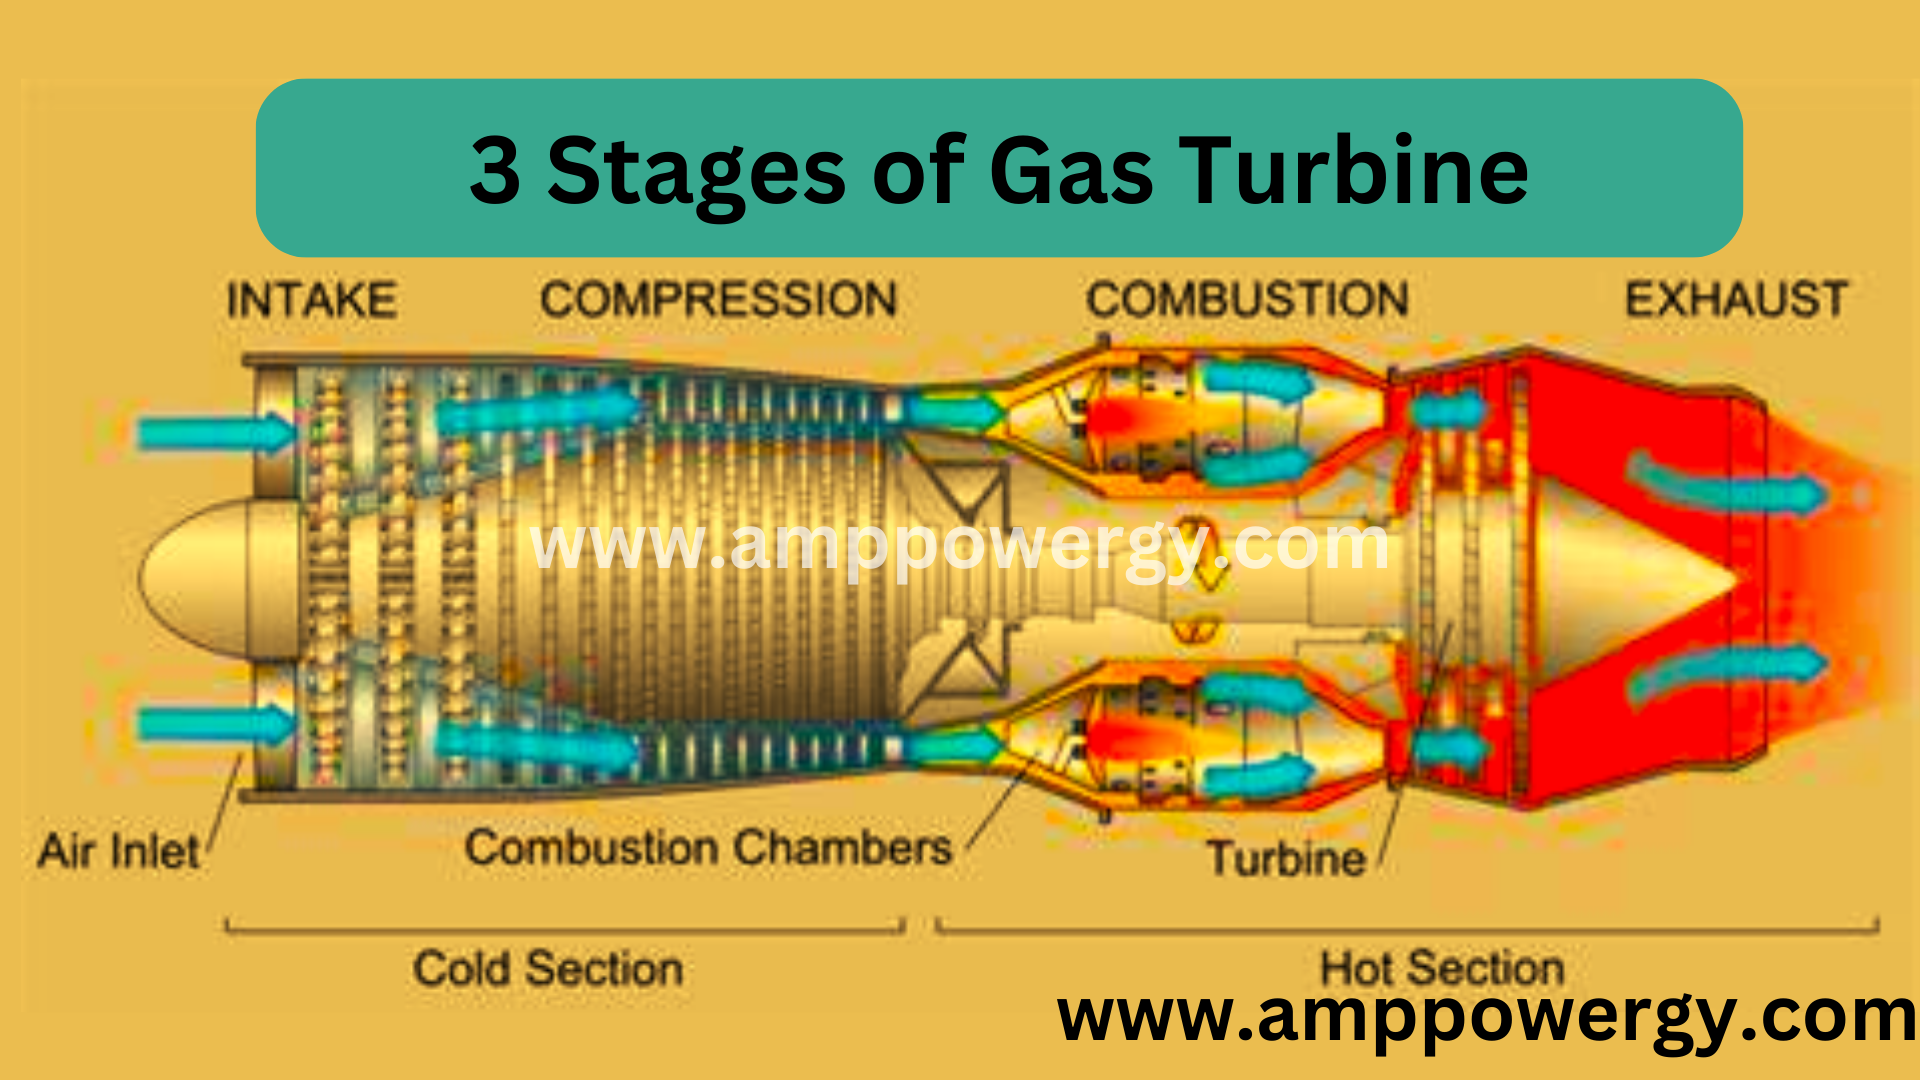 What are the 3 Stages of Gas Turbine?